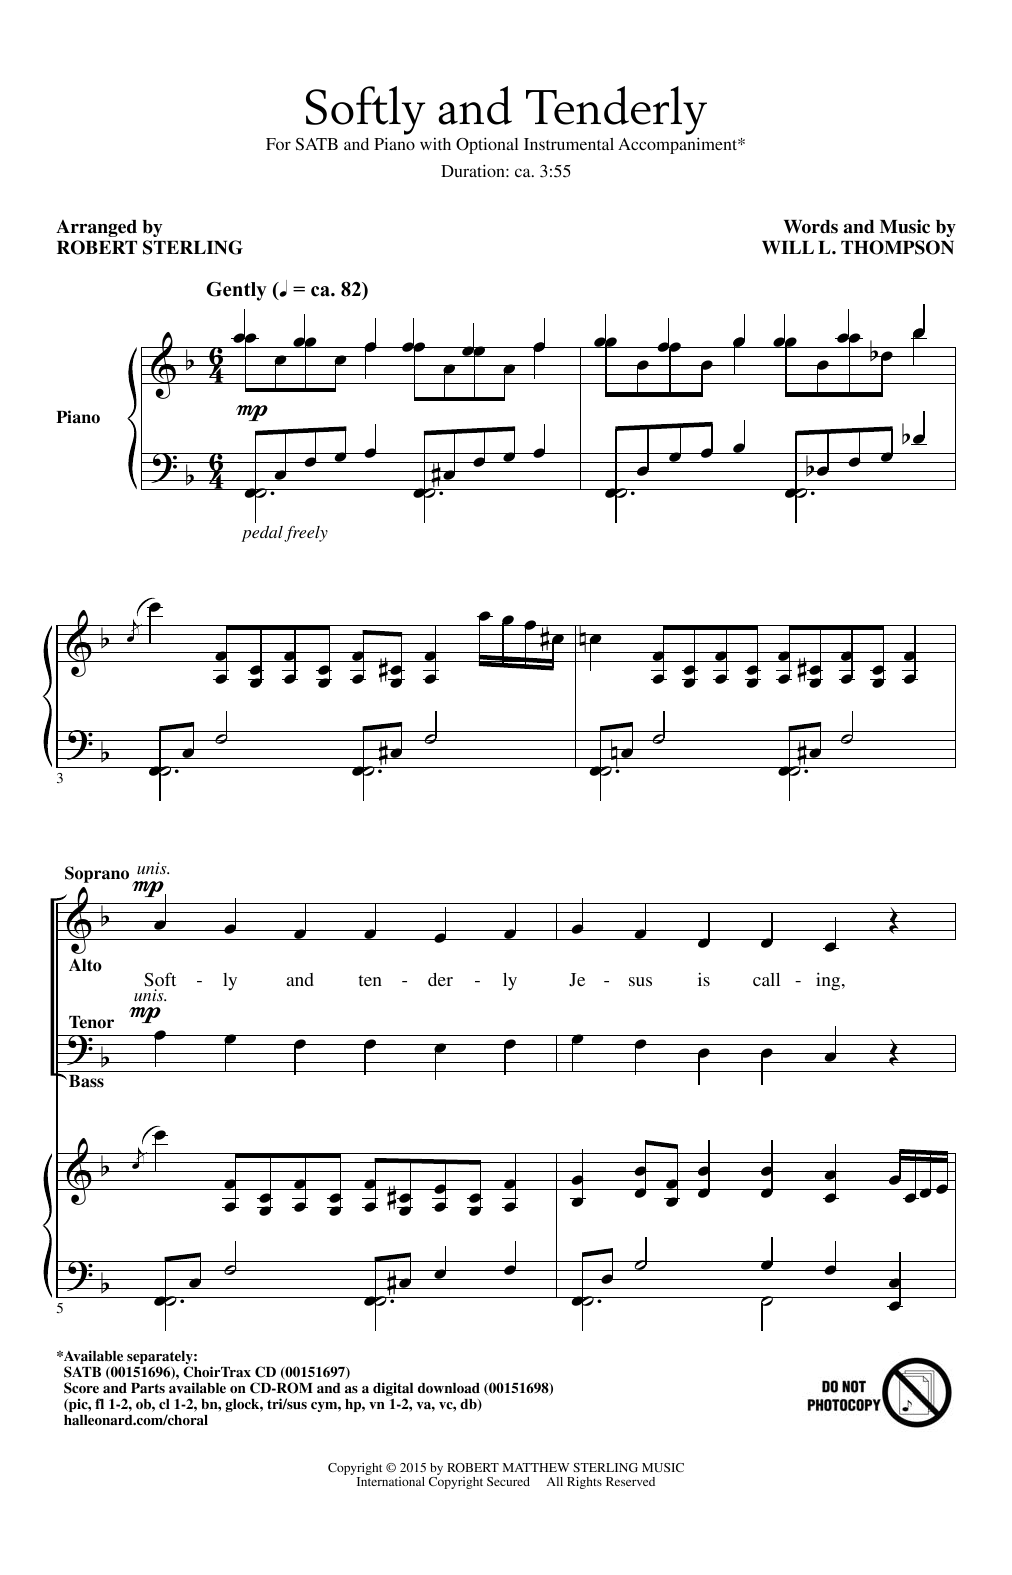 Download Will L. Thompson Softly And Tenderly (arr. Robert Sterli Sheet Music